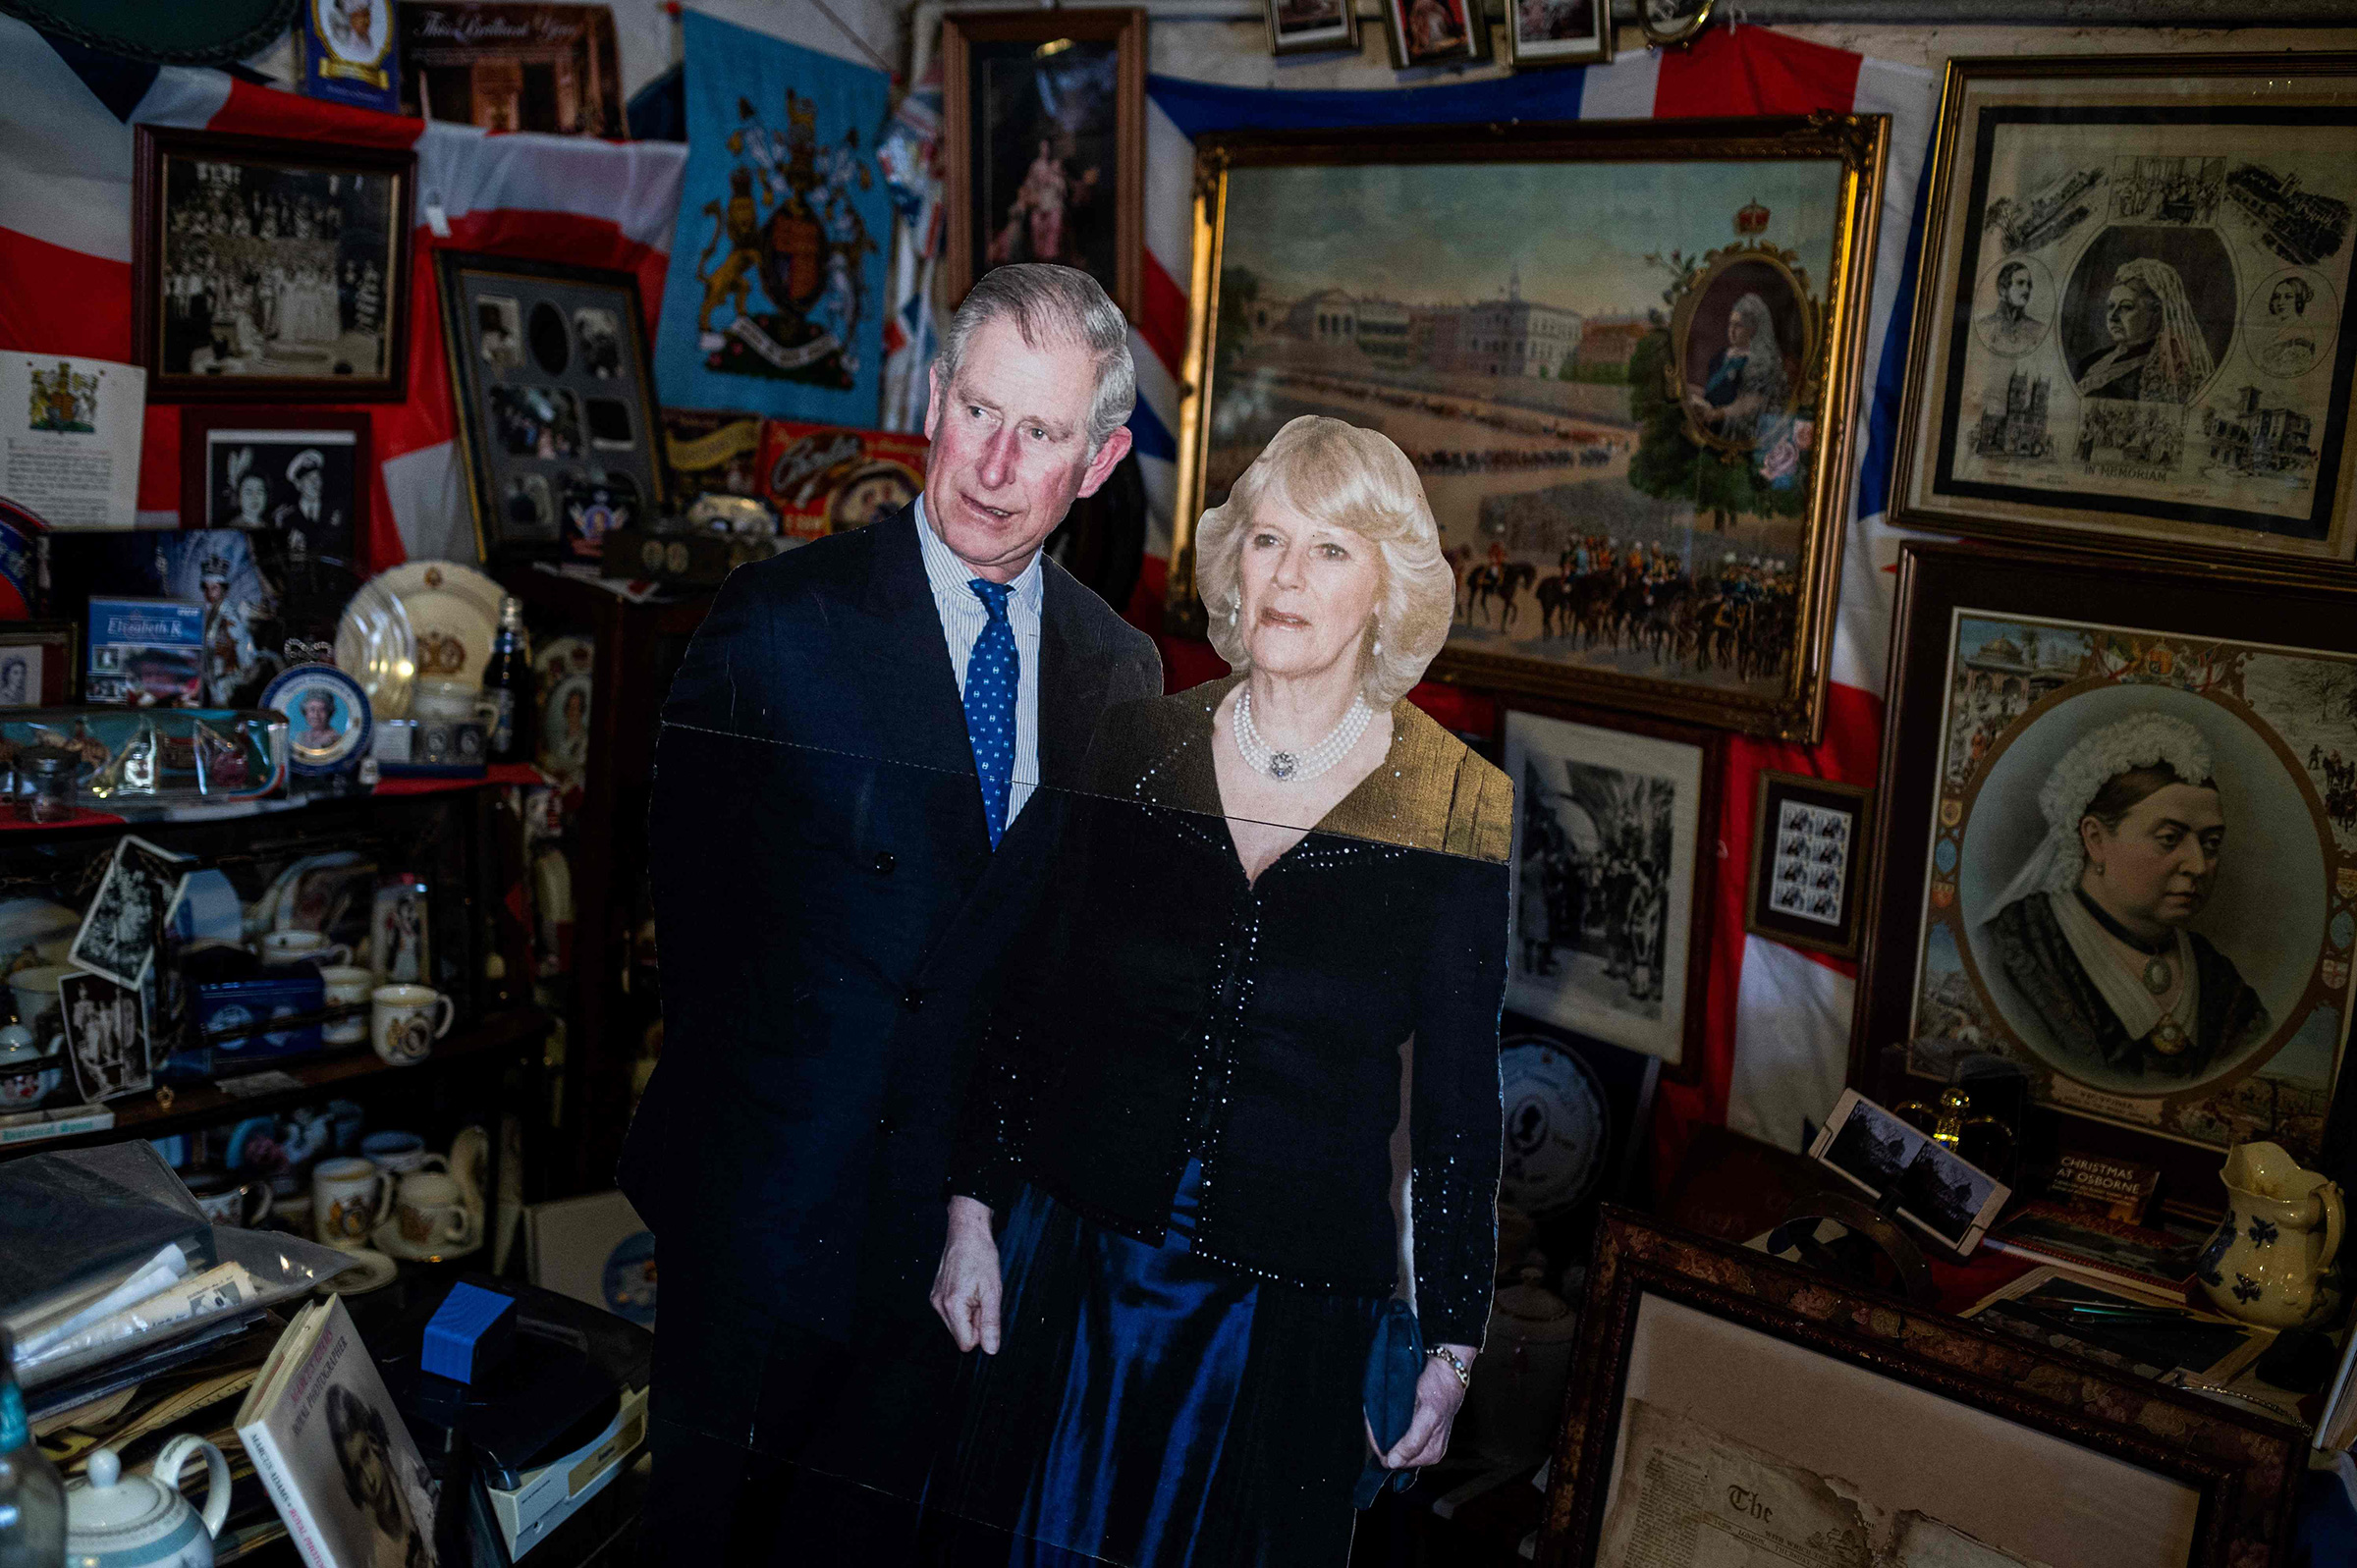 A life-sized cardboard cut-out of King Charles III and Camilla, Queen Consort is displayed amongst the 13,283 pieces of royal memorabilia which ardent monarchist Anita Atkinson exhibits at her Weardale farm near Bishop Auckland, northern England on March 31. (Oli Scarff—AFP/Getty Images)